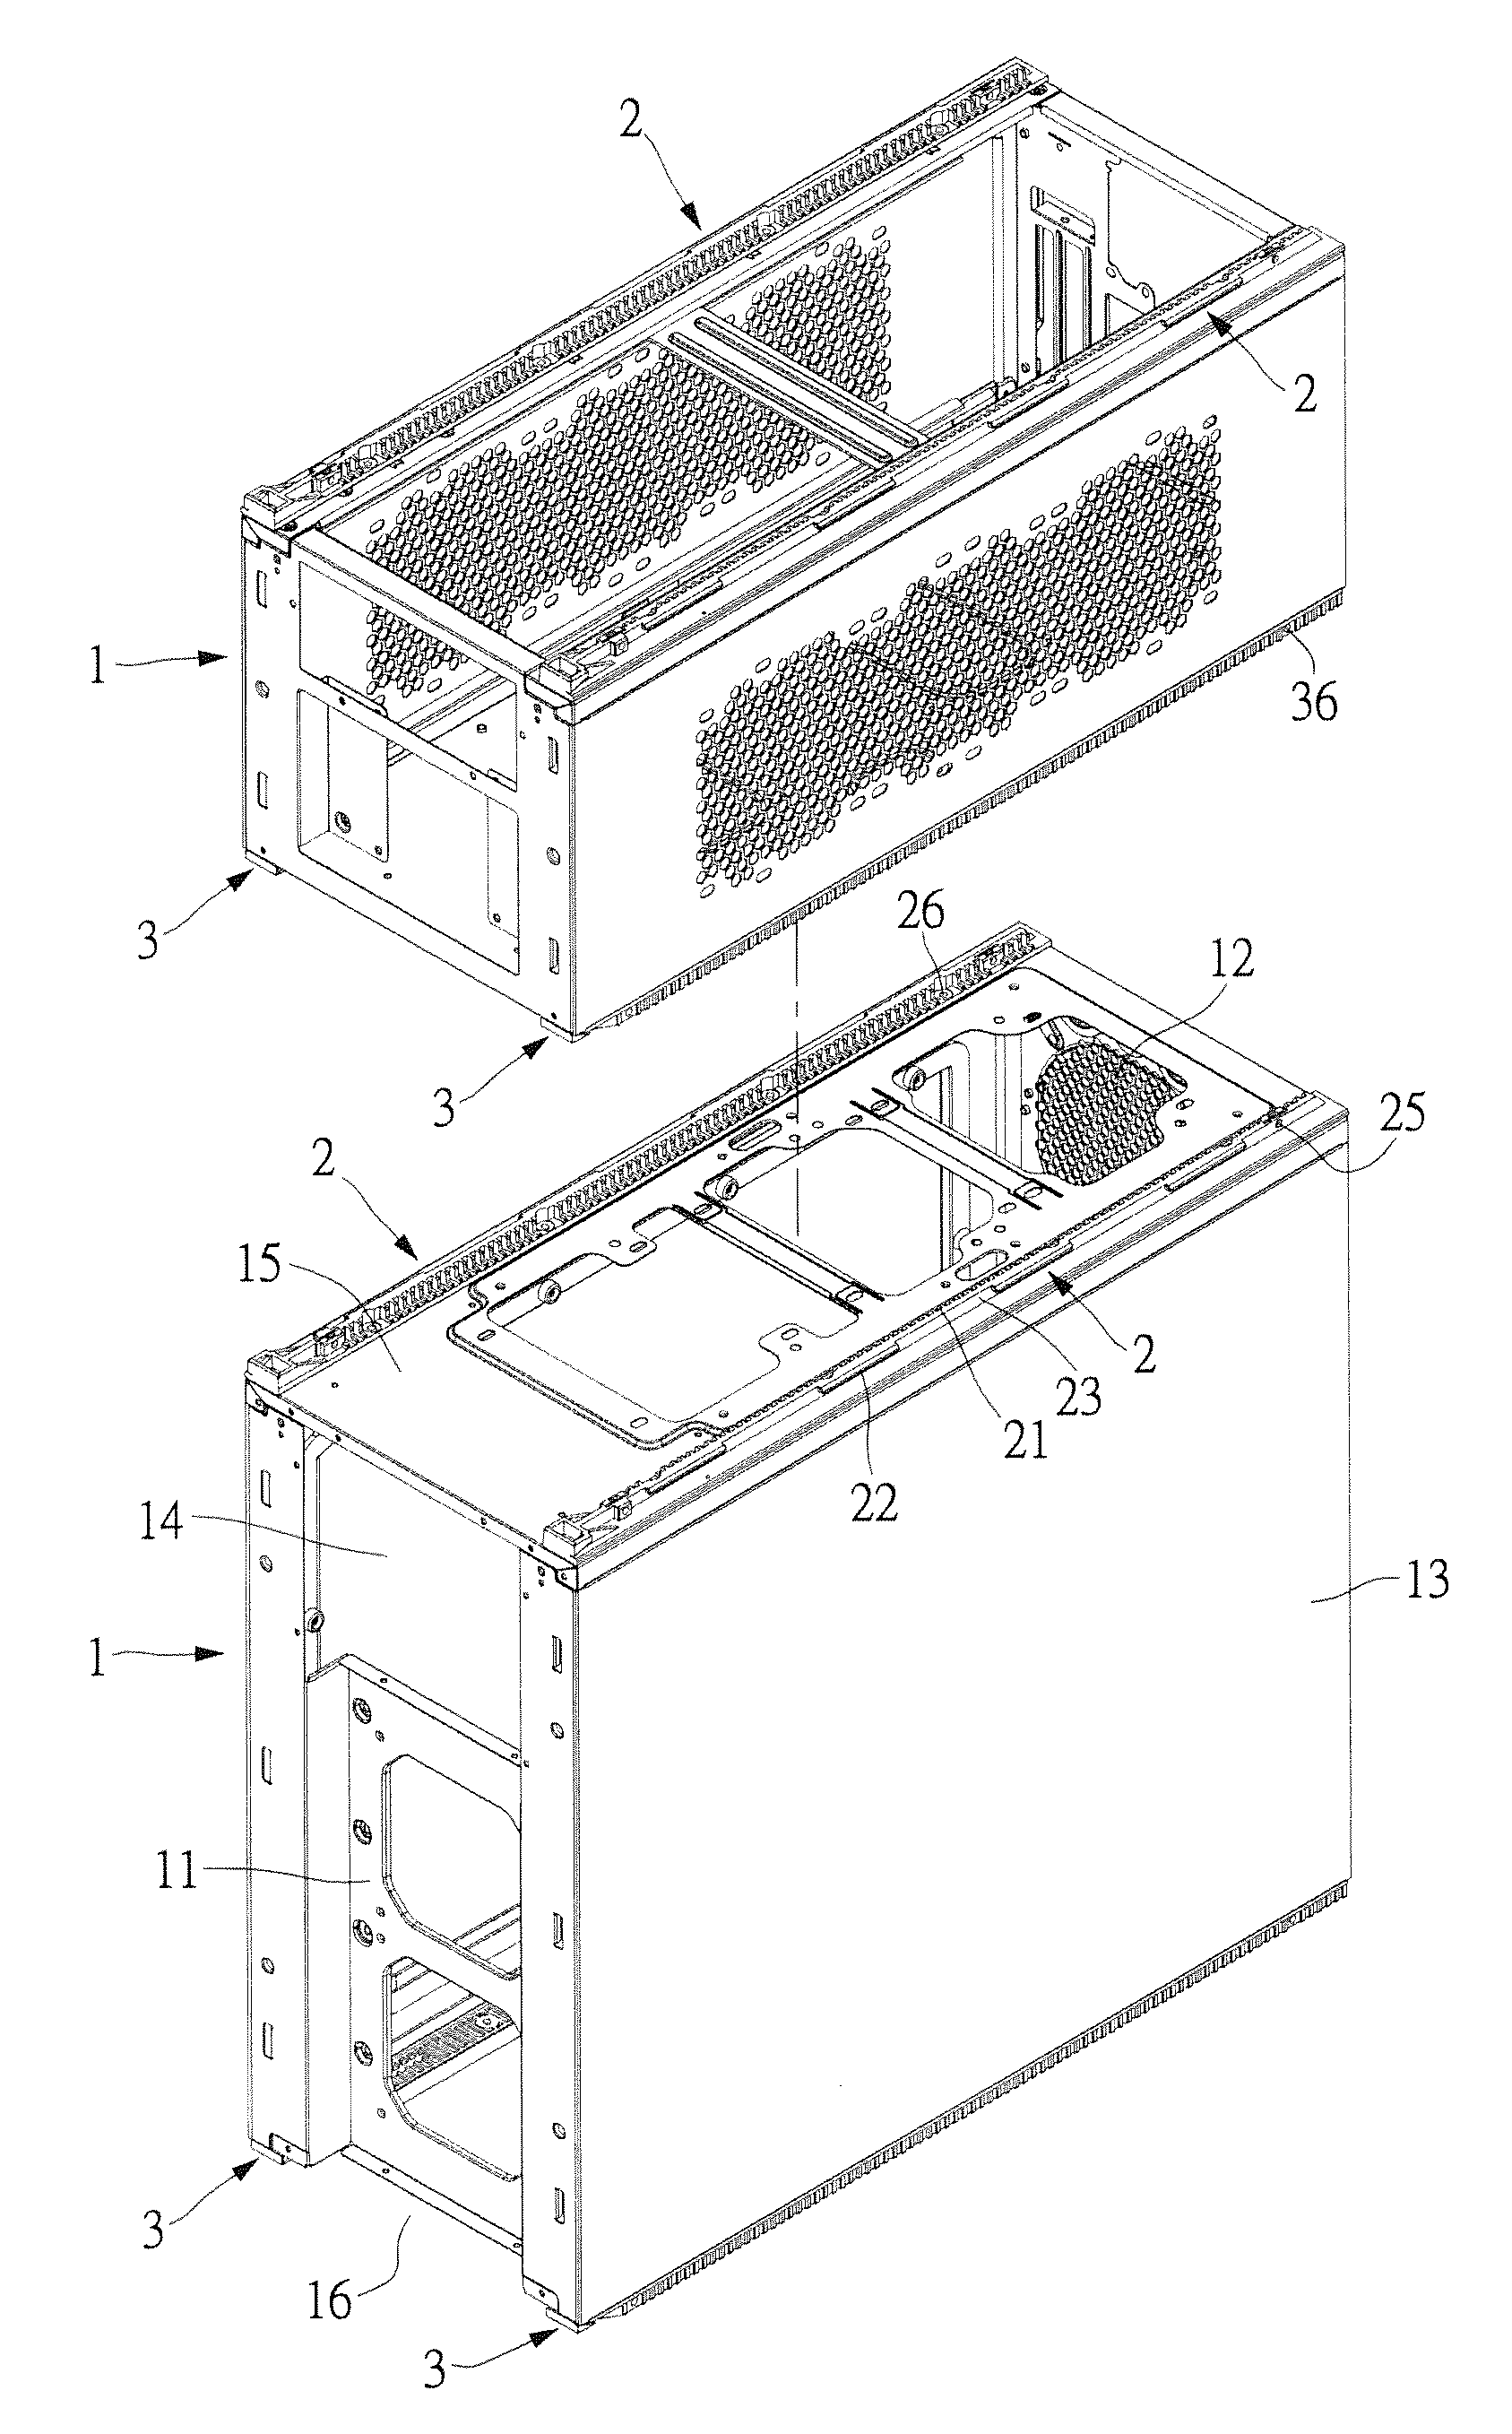 Stackable computer housing assembly